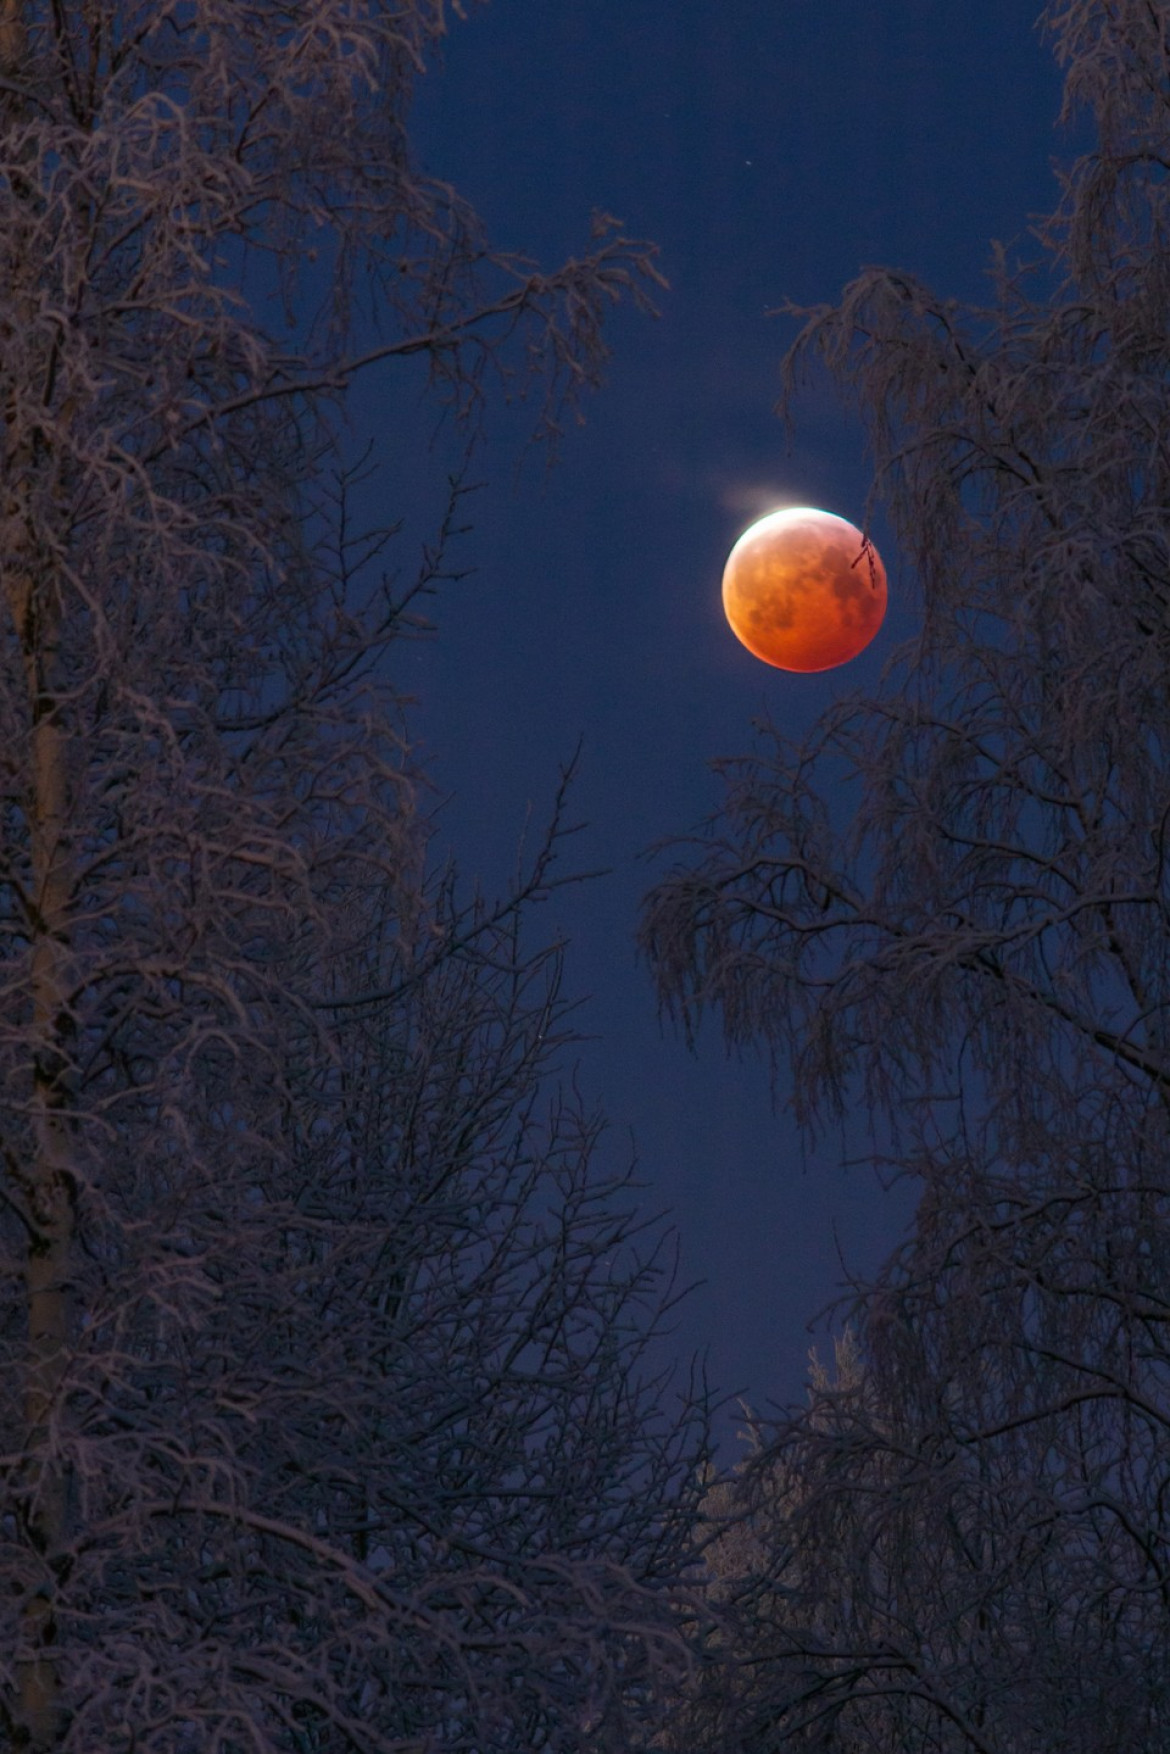 fot. Keijo Laitala, "Bloodborne" / Insight Investment Astronomy Photographer of the Year 2019